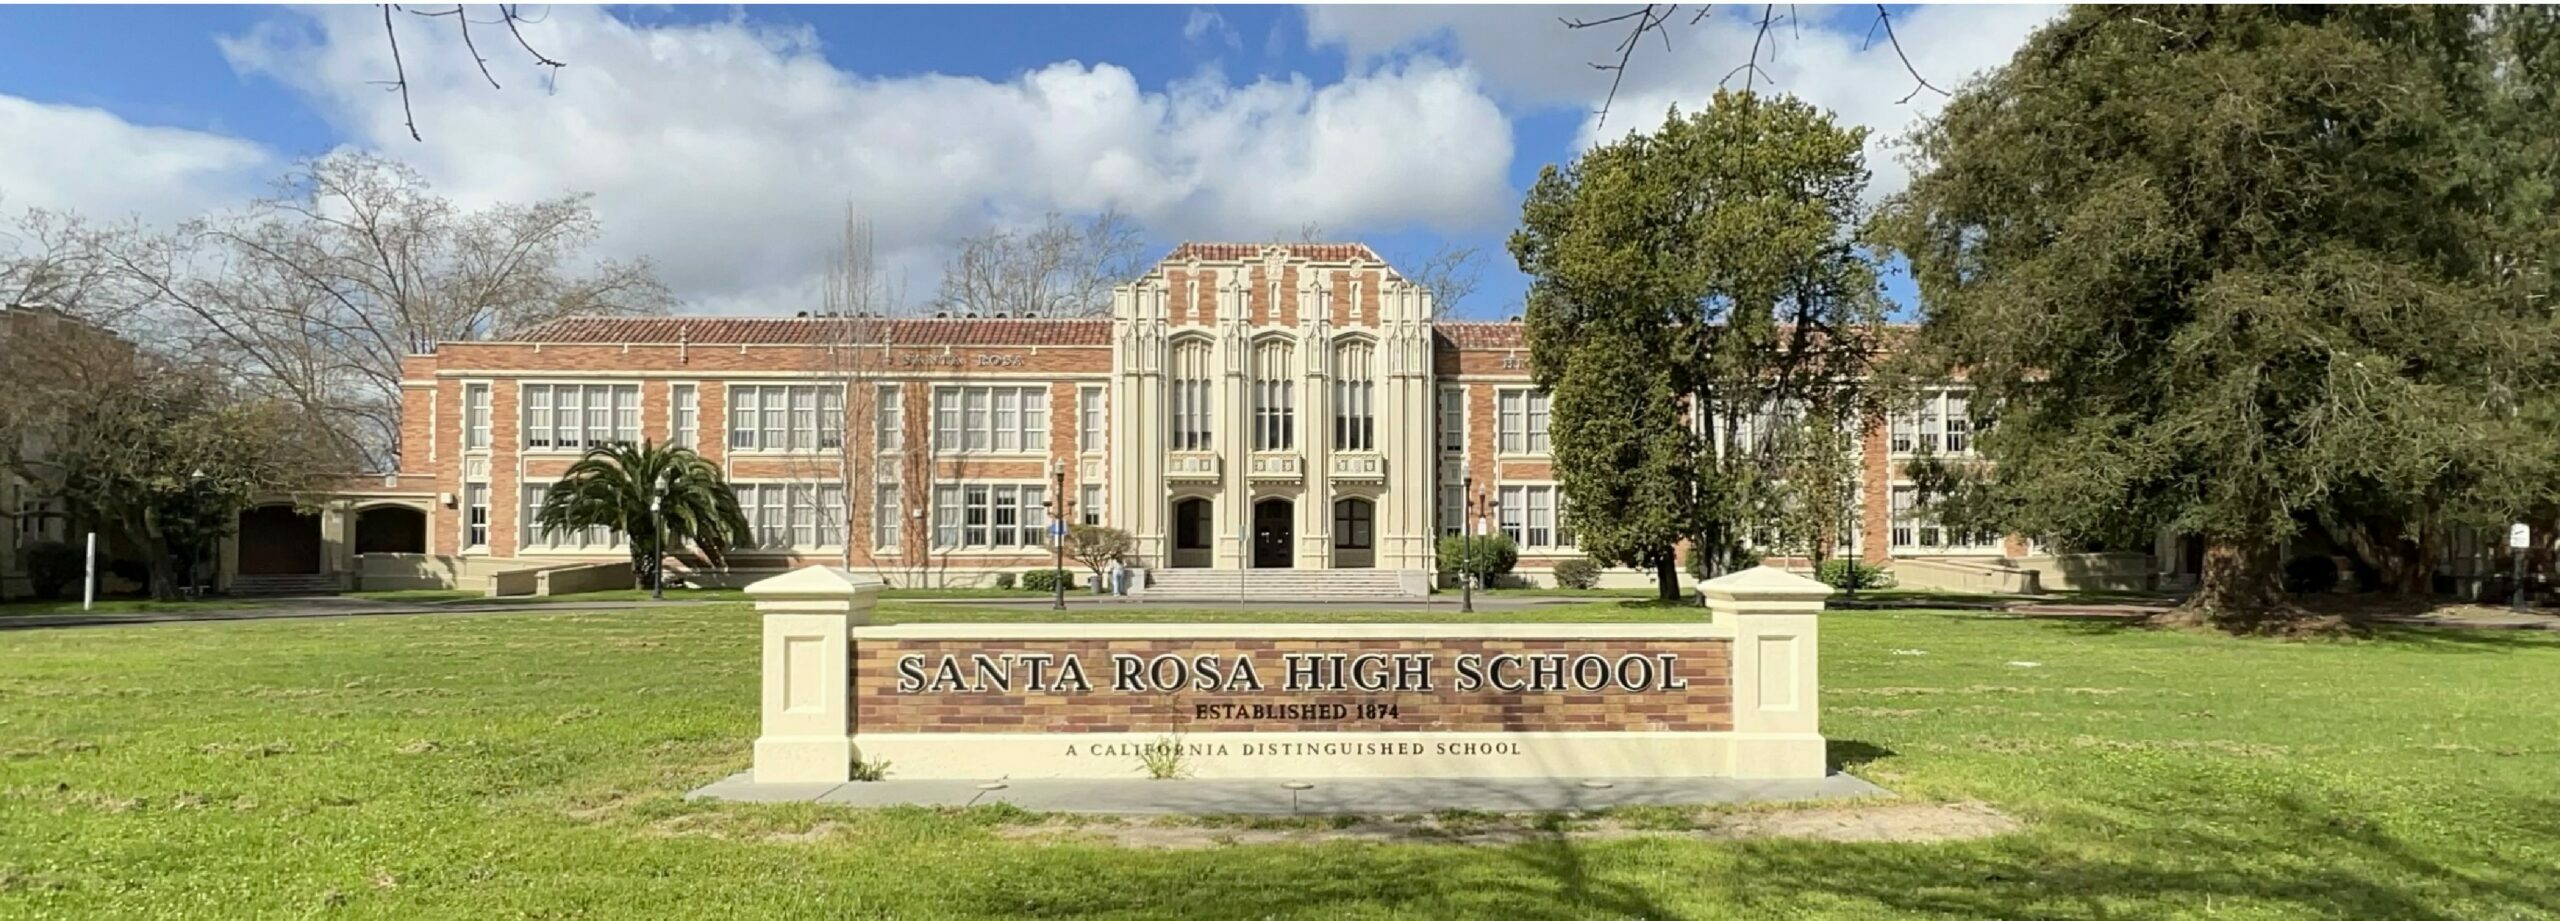 Image of the sign on the front lawn of the Santa Rosa High School main building